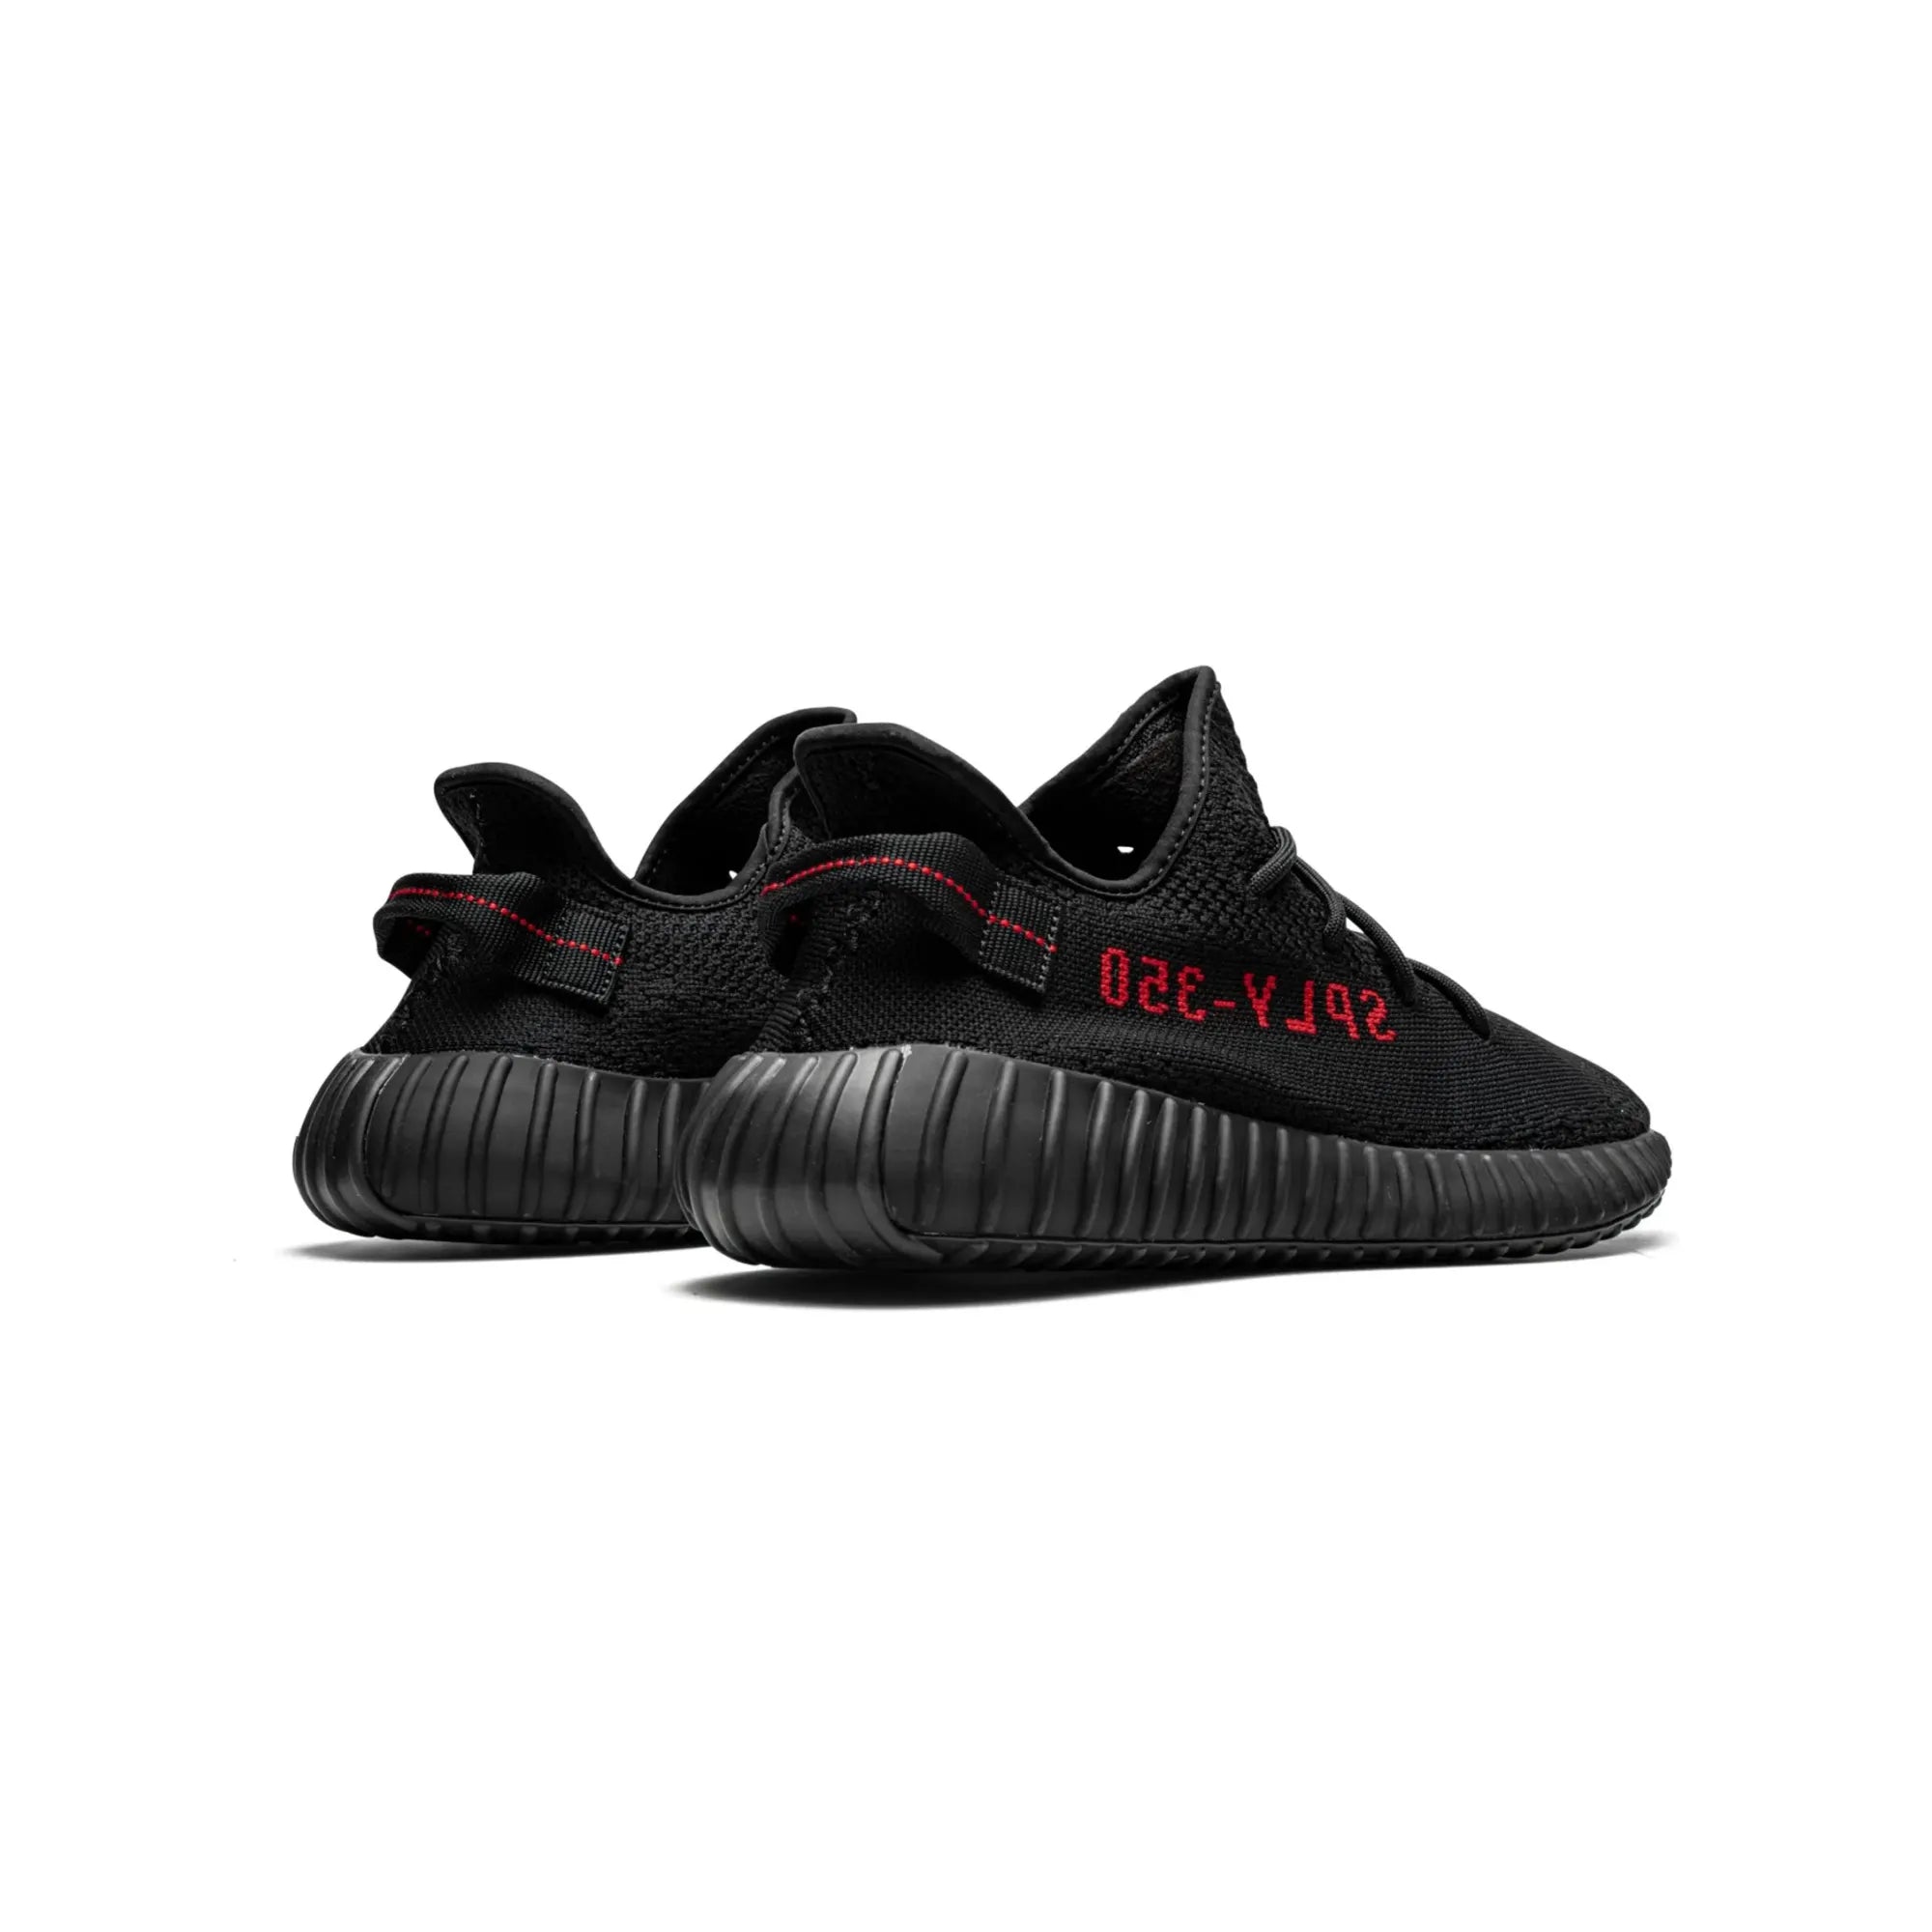 Adidas Yeezy Boost 350 V2 Black Red (2017/2020) | ABco